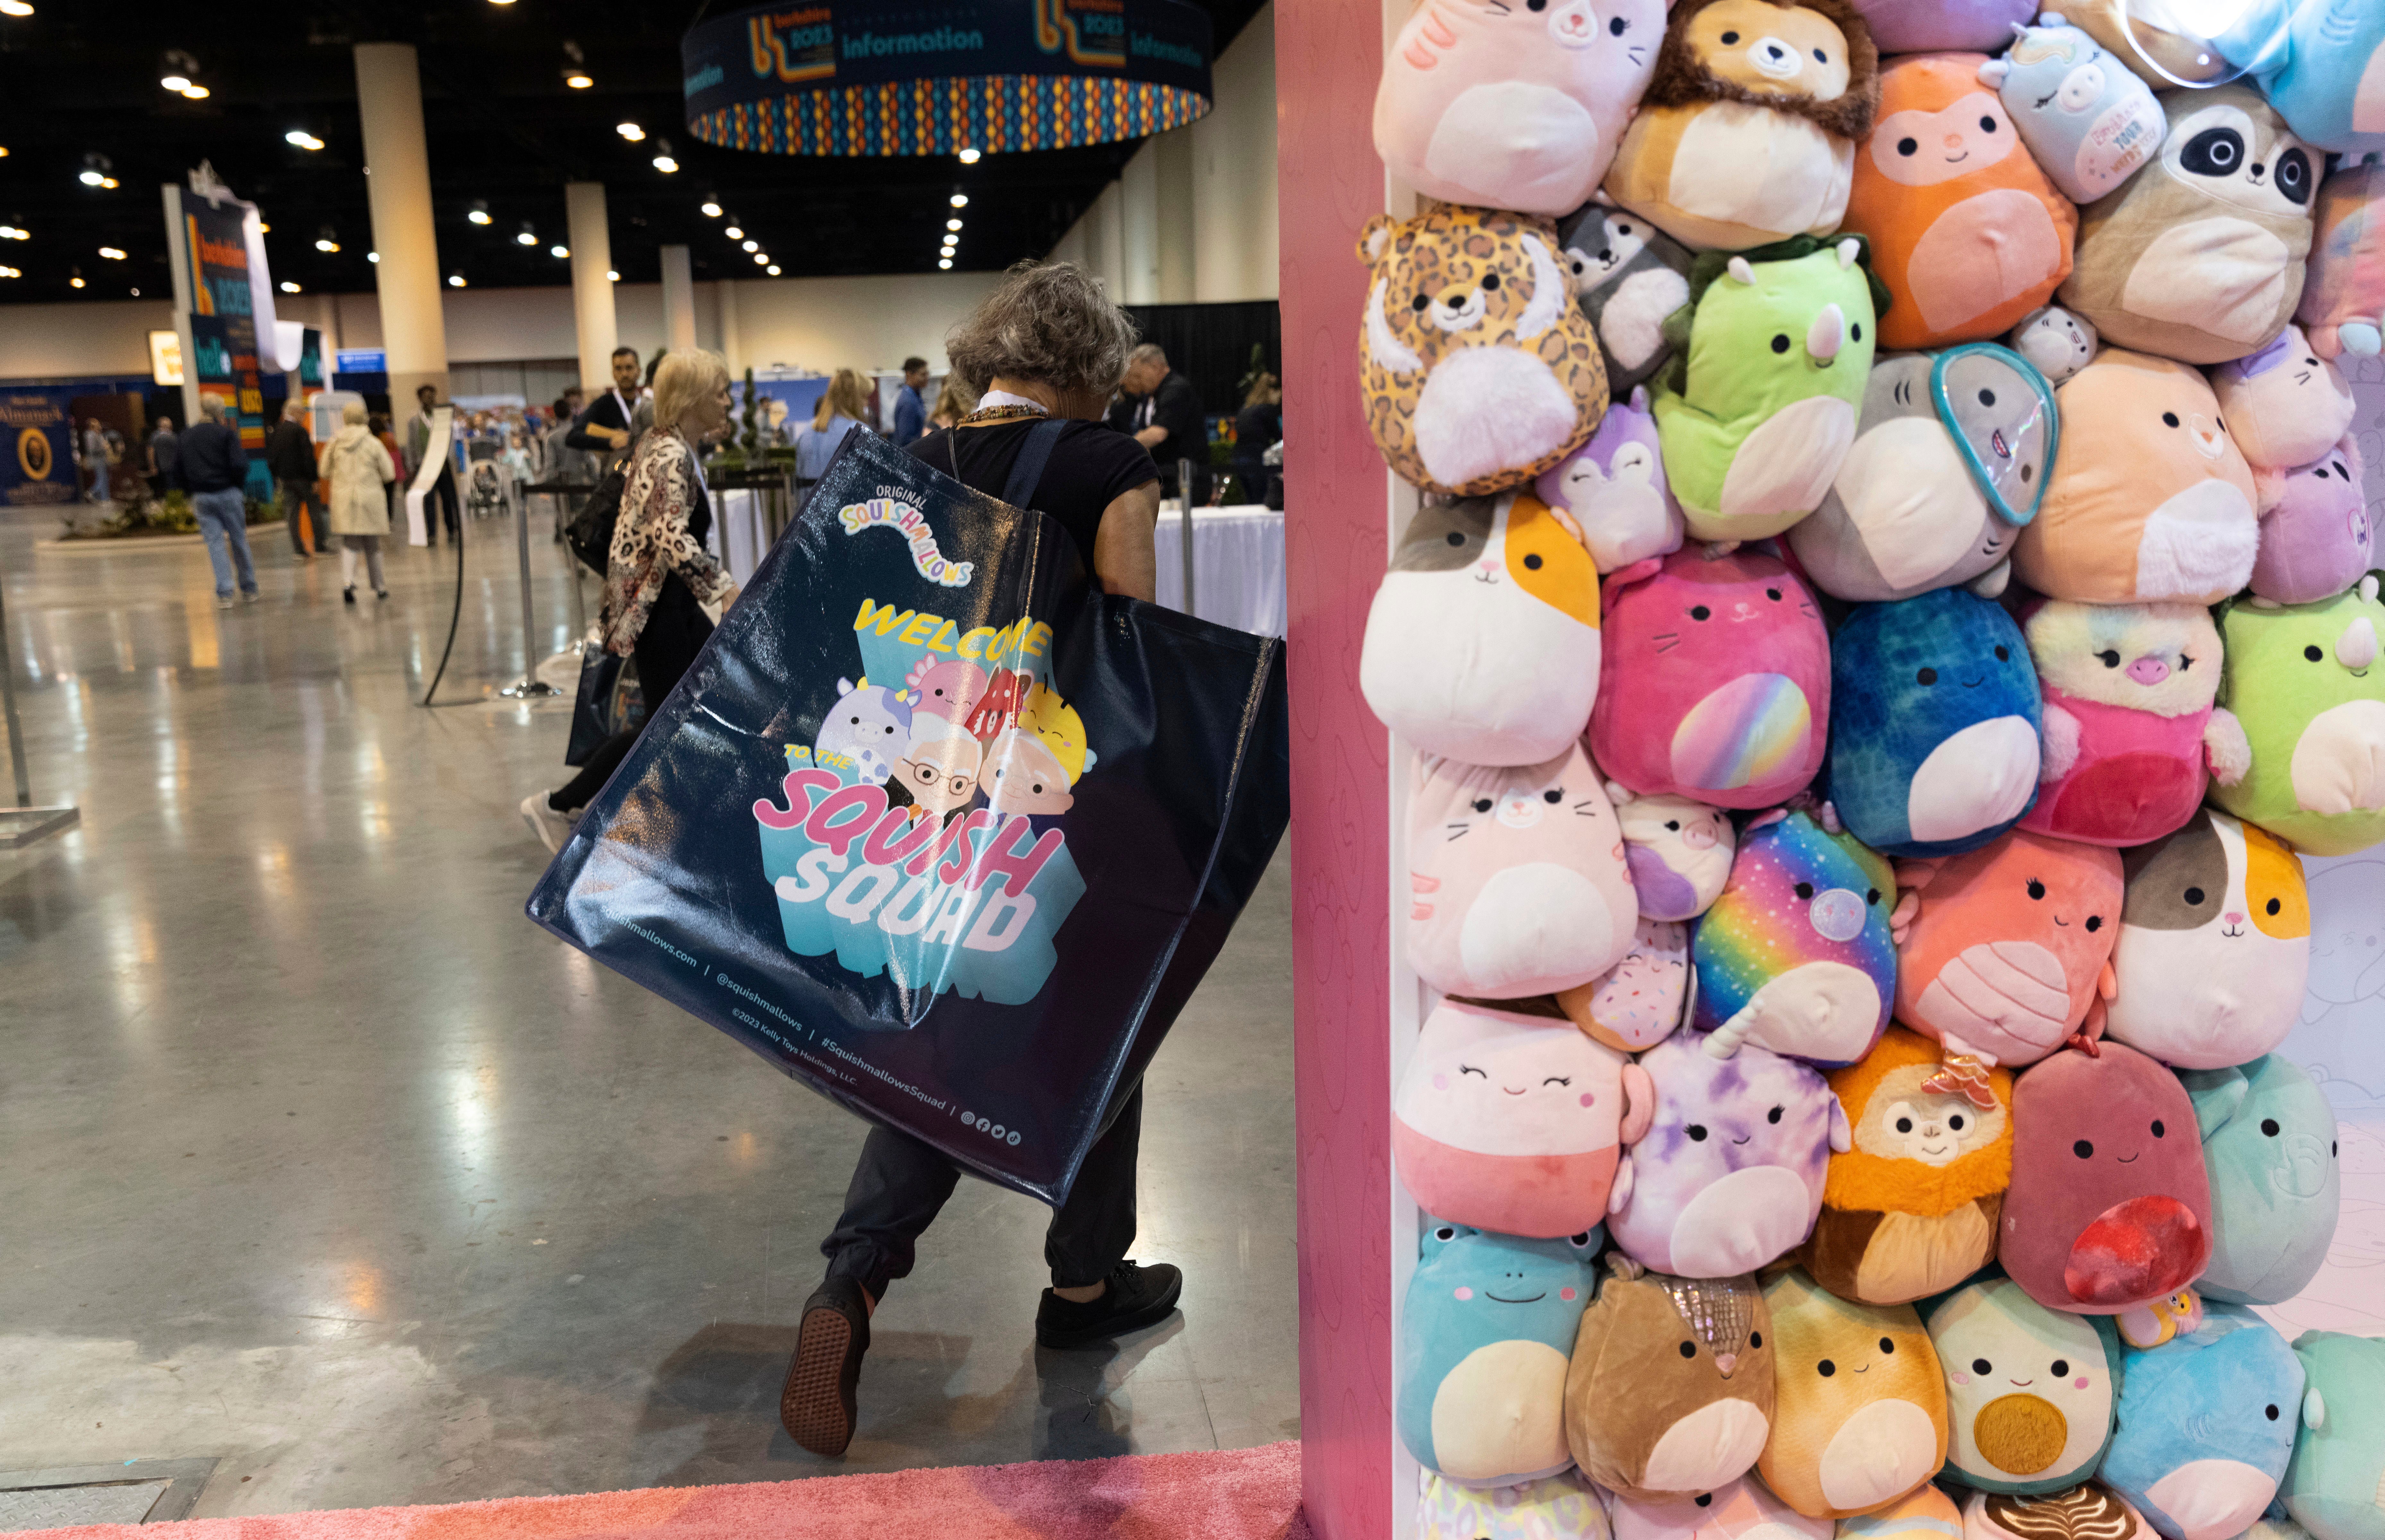 A shareholder leaves the Squishmallows booth with a large bag of purchases in the exhibition hall